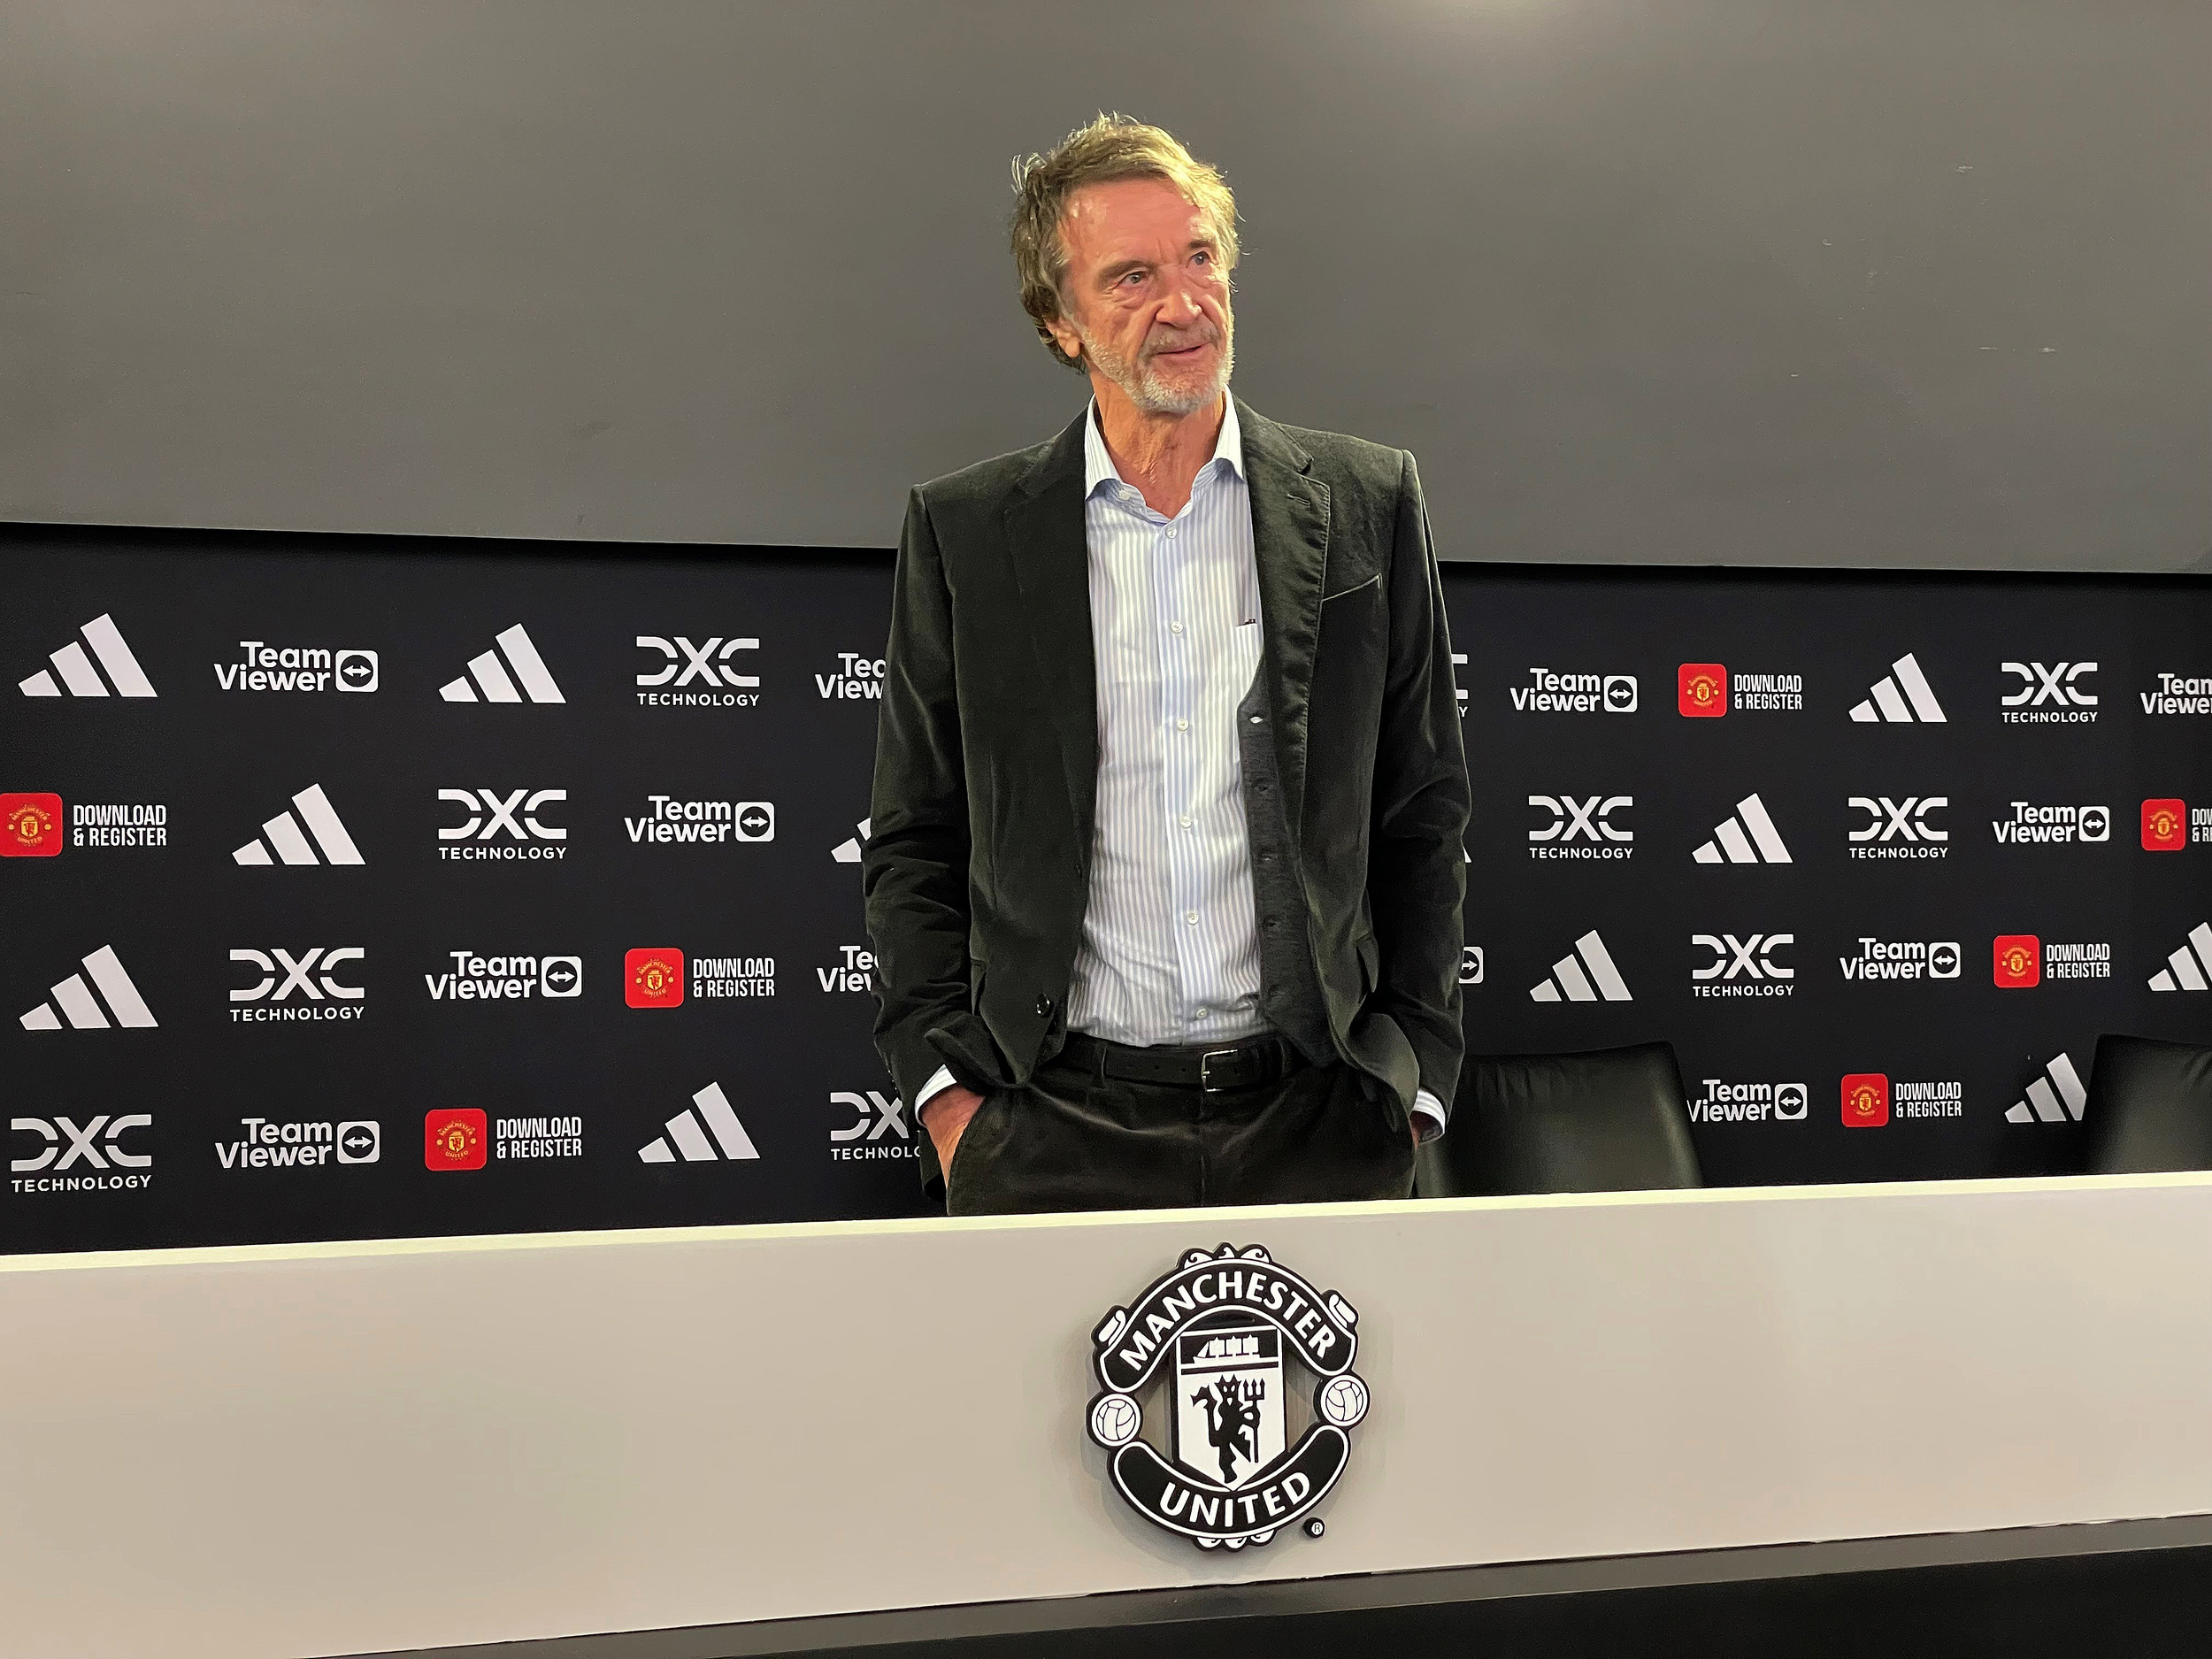 sir jim ratcliffe urges manchester united to ‘seek alternative employment’ if they don’t like new policy